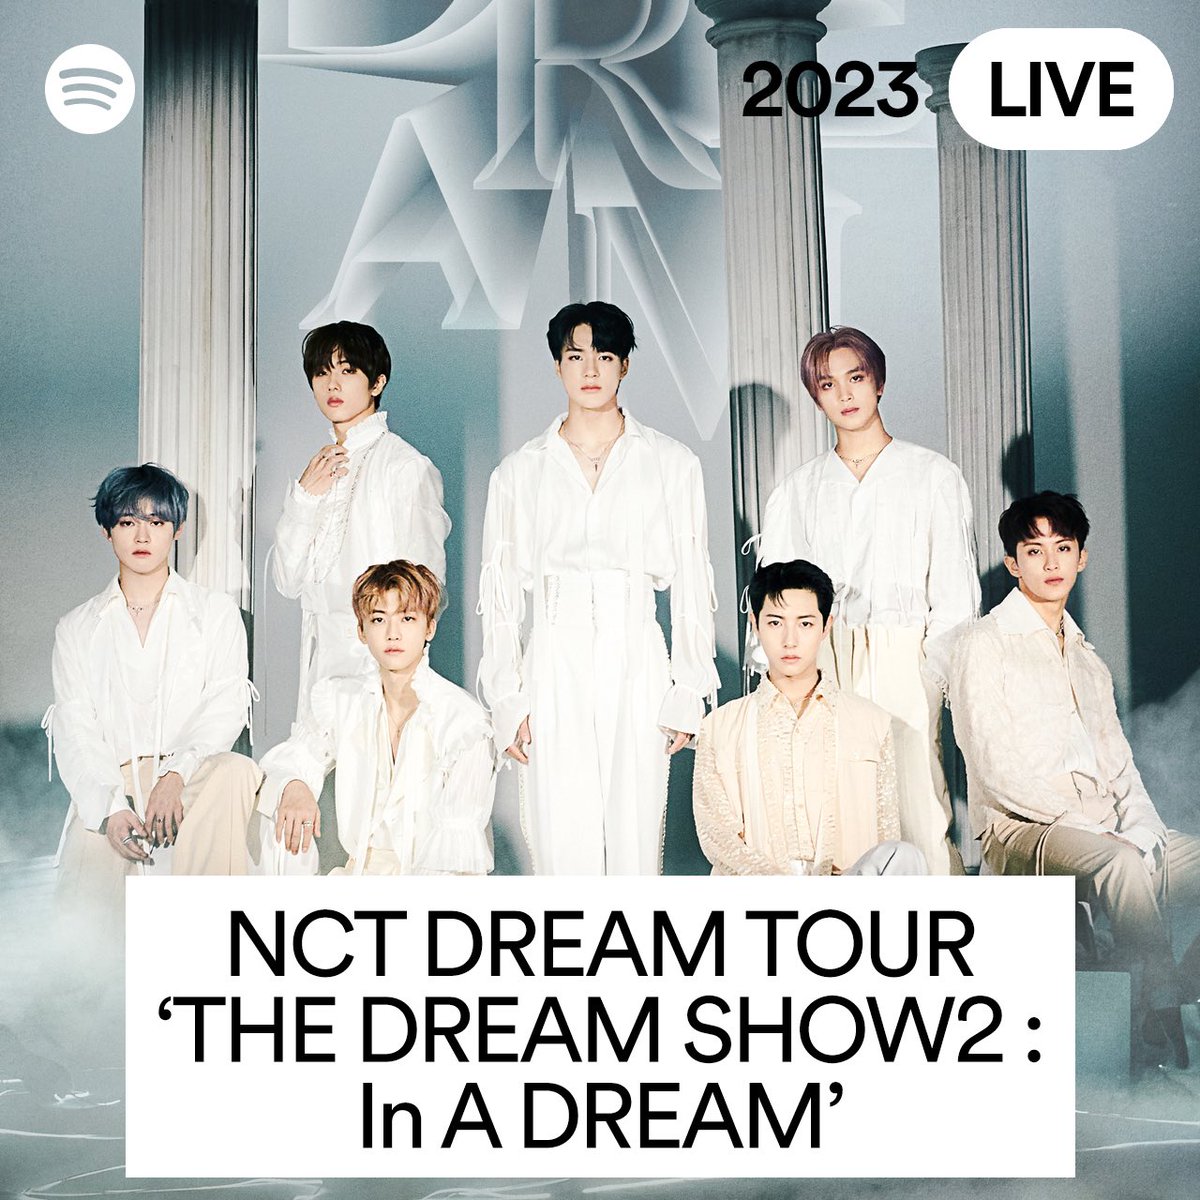 NCTzens! NCT DREAM TOUR ‘THE DREAM SHOW2 : In A DREAM’ playlist is out now on @Spotify💚
Make sure to stream our concert live set in Berlin and please stay tuned for our upcoming tours!

🎧bit.ly/3WA8pfw

#NCTDREAM #THEDREAMSHOW2
#THEDREAMSHOW2_In_YOUR_DREAM…